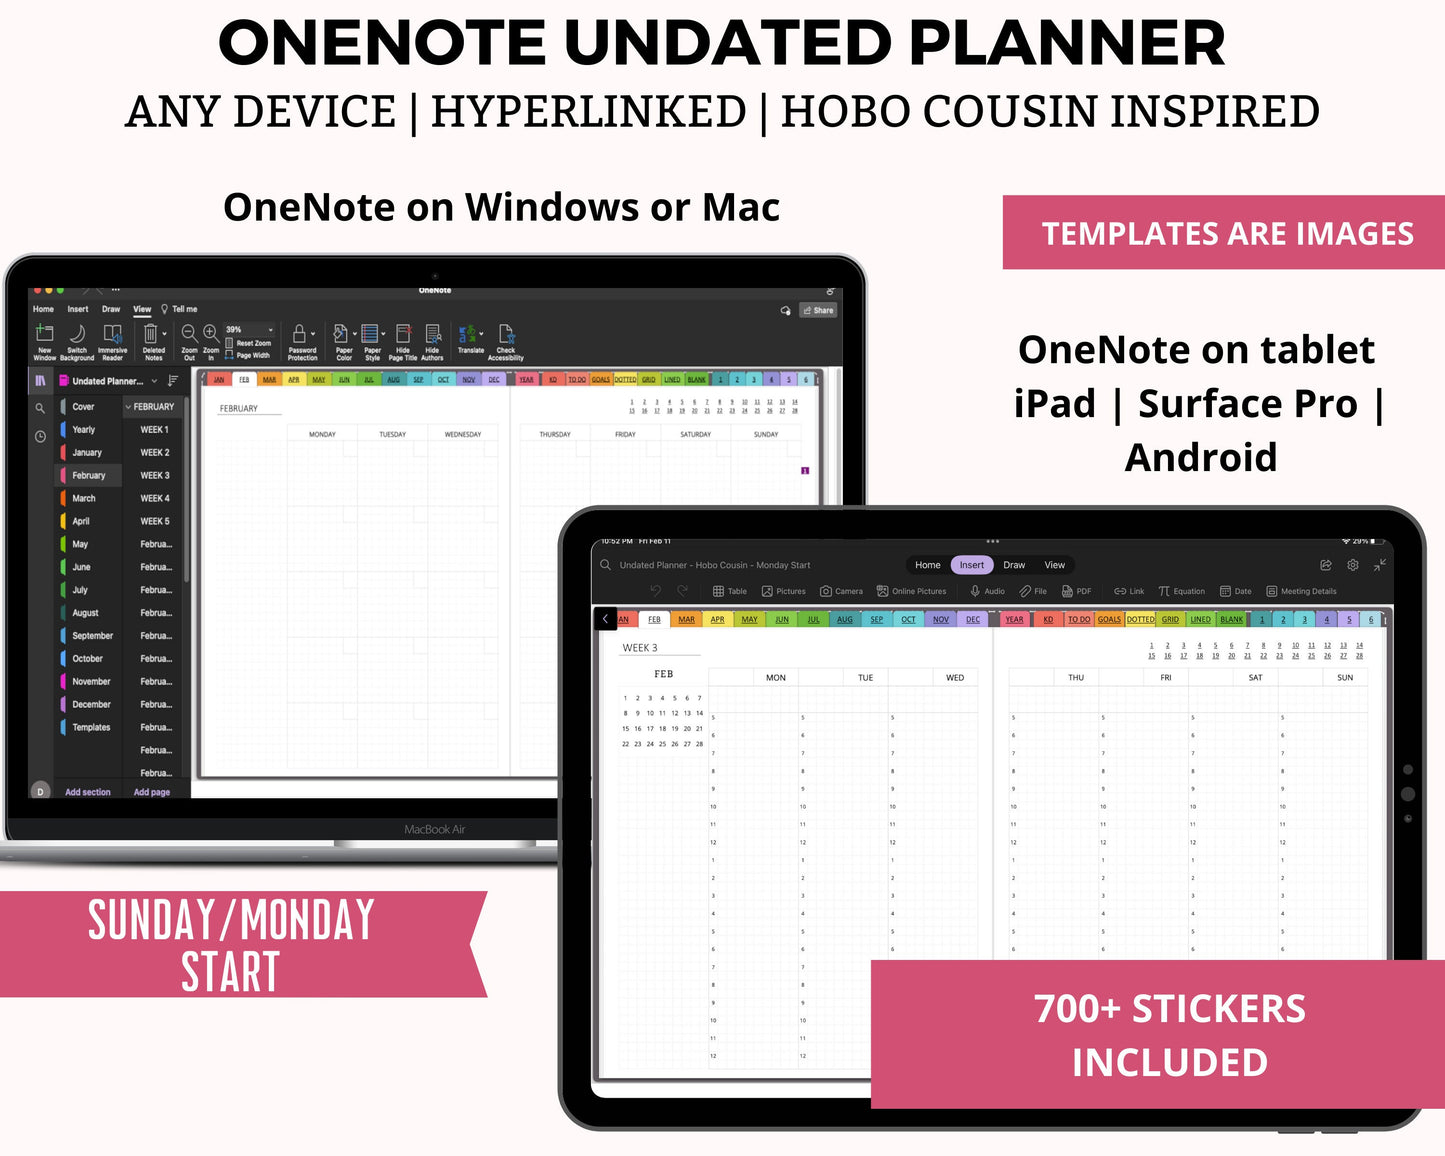 OneNote Undated Planner | Hobo Cousin Inspired Surface Pro, Android, iPad Planner | Rainbow